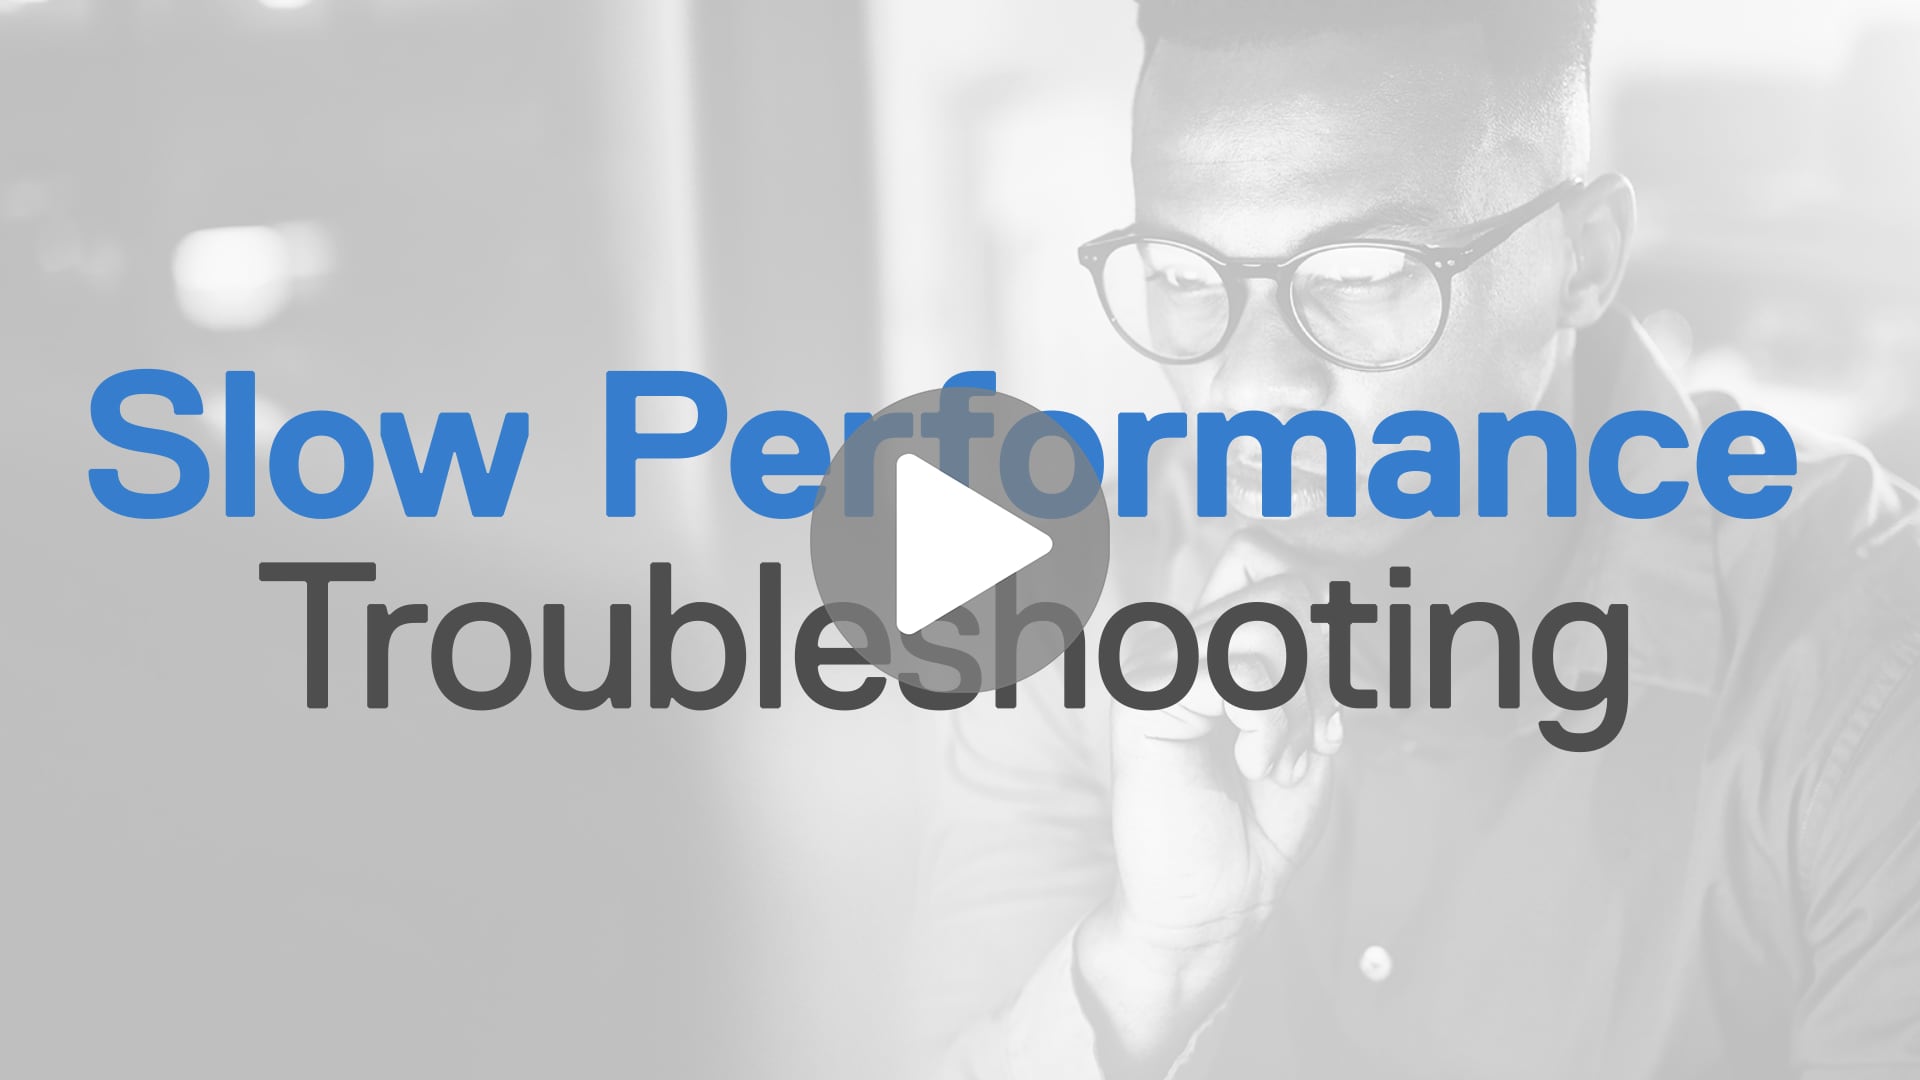 Slow performance troubleshooting video